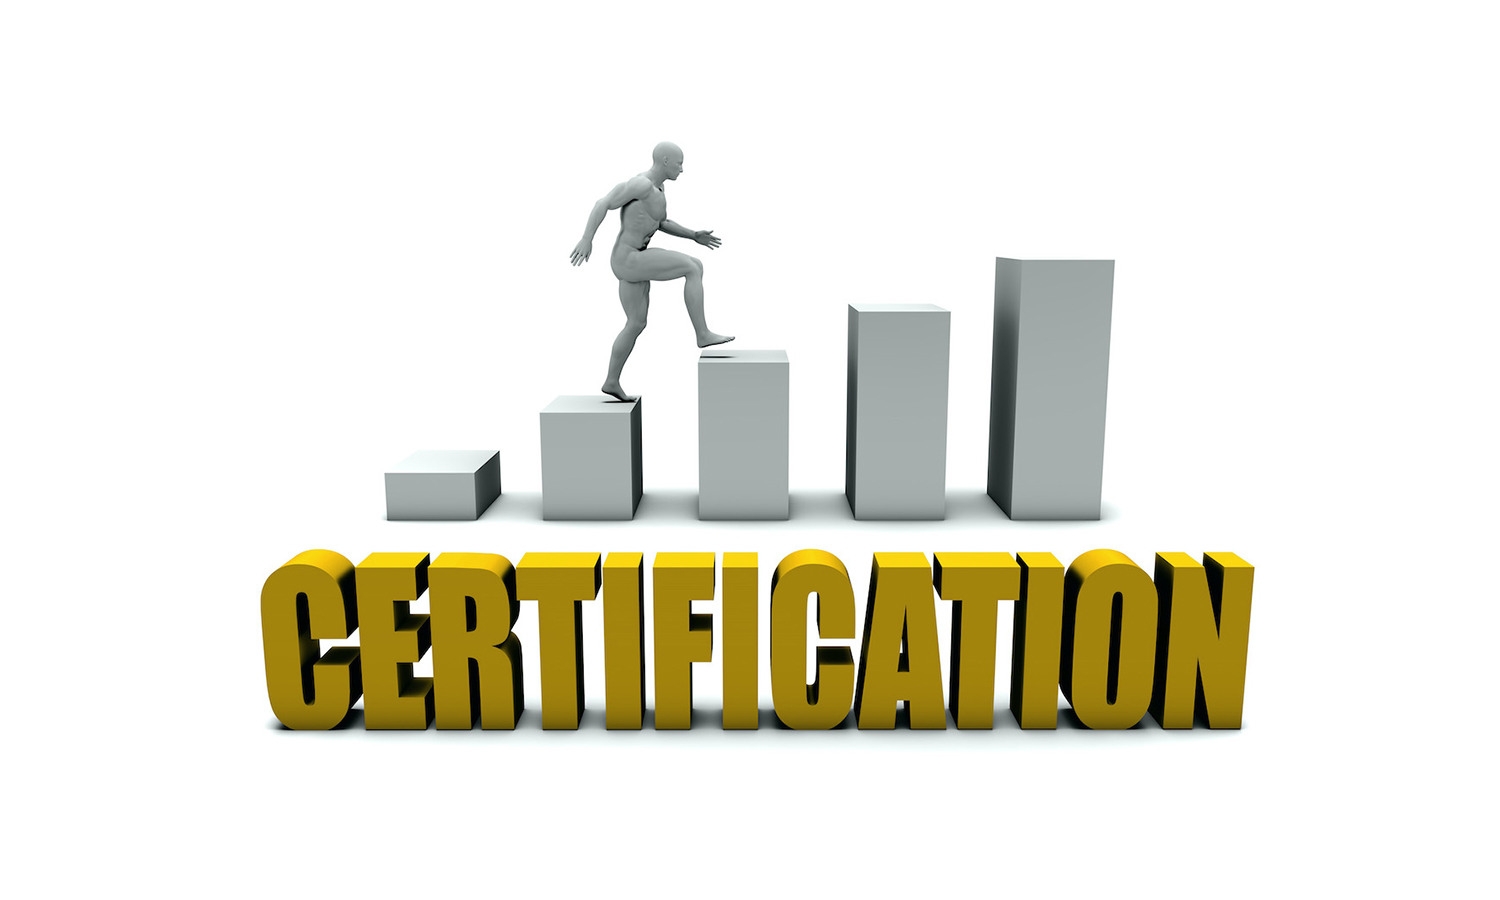 Improve Your Certification Image